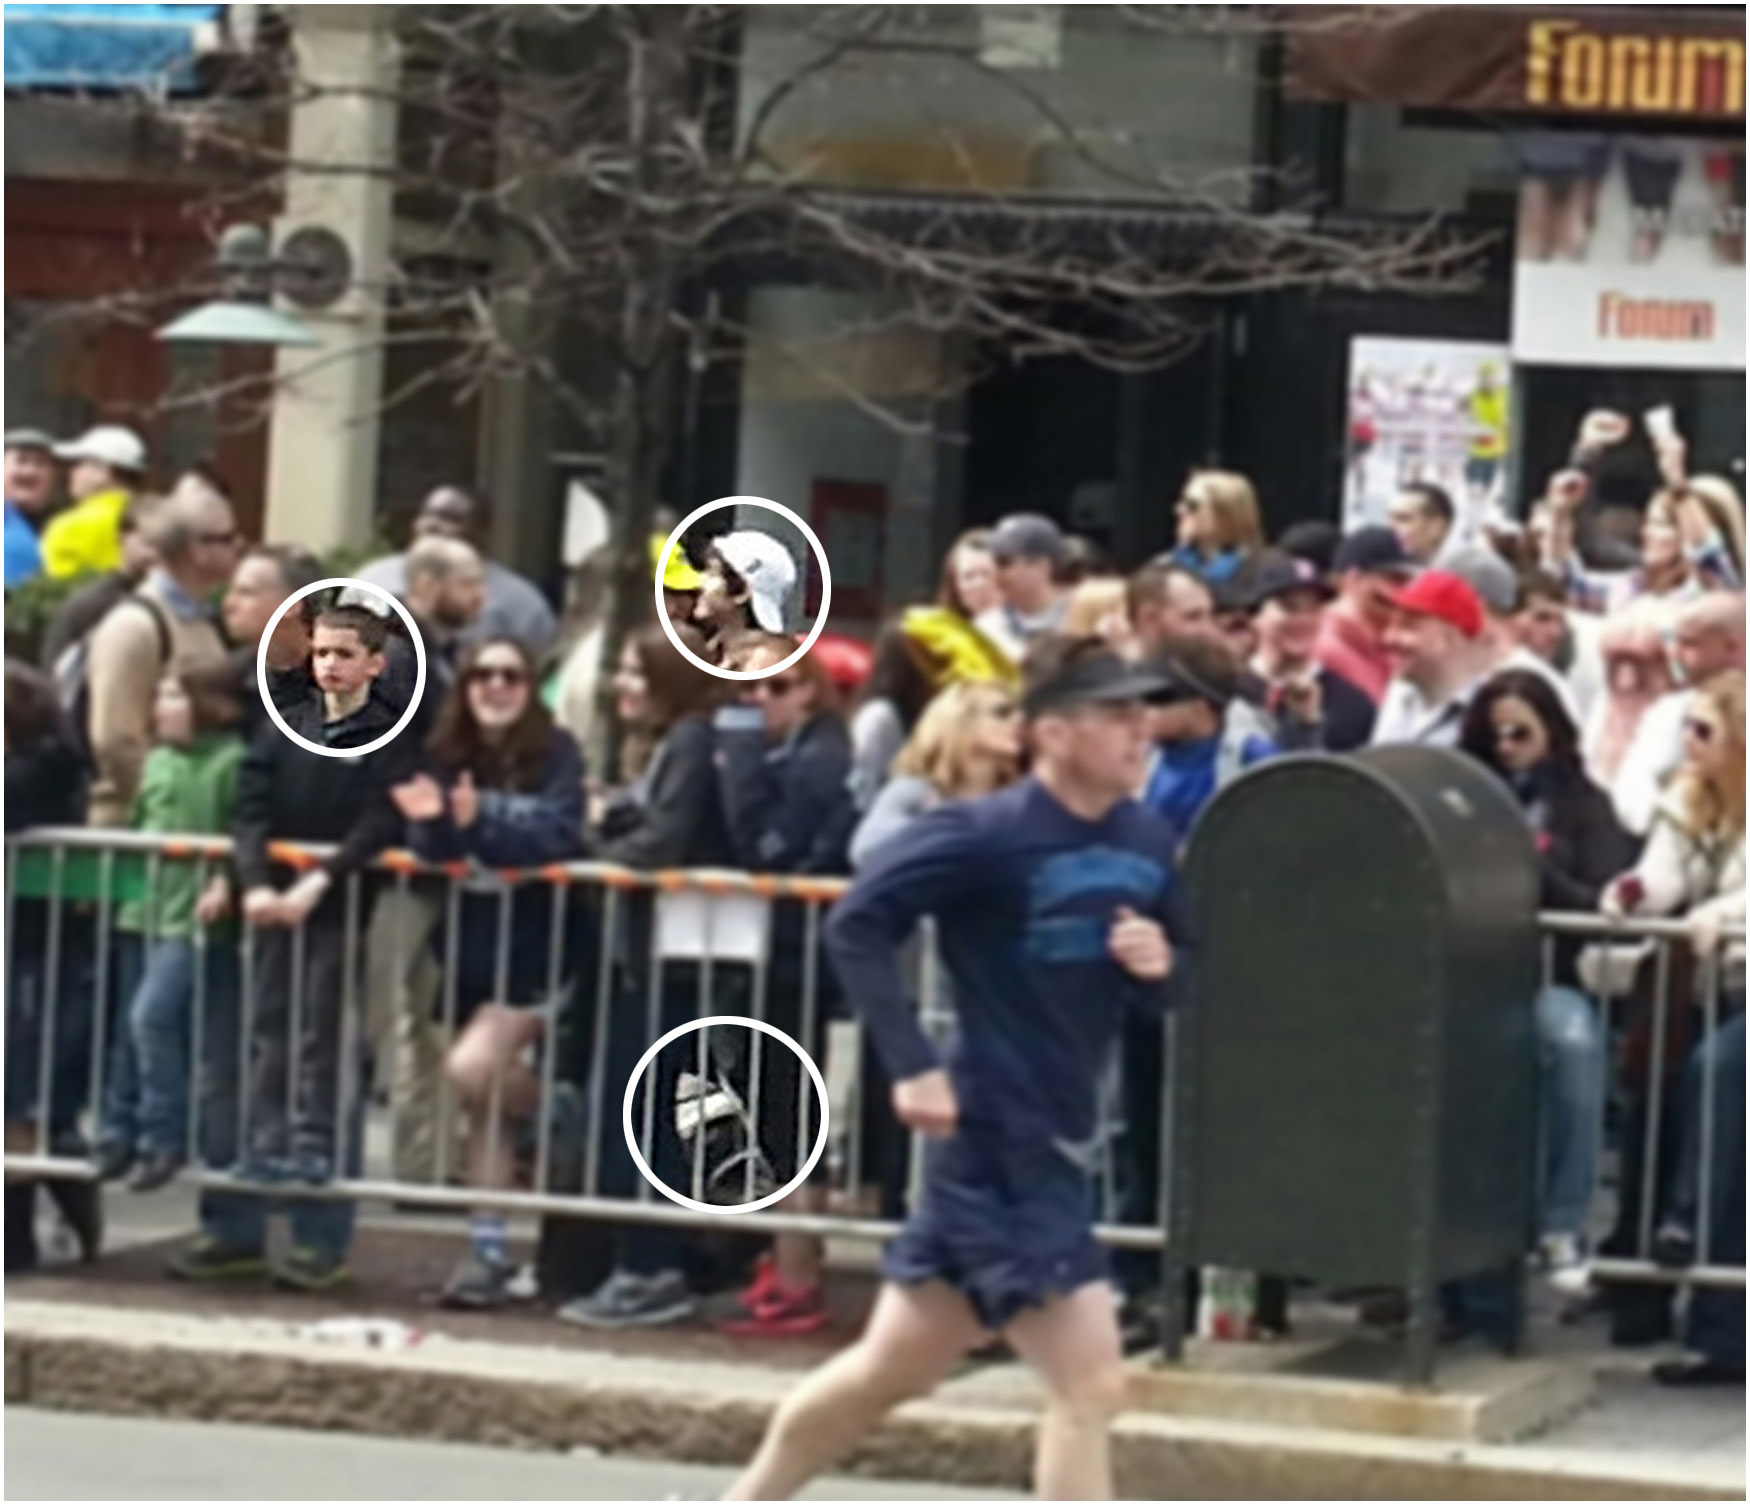 PHOTO: A cell phone image appears to show Boston Marathon bombing suspect #2, Dzhokhar A. Tsarnaev, near a young boy who is standing on the railing and thought to be eight-year-old victim Martin Richard on Boylston Street April 15, 2013 in Boston.